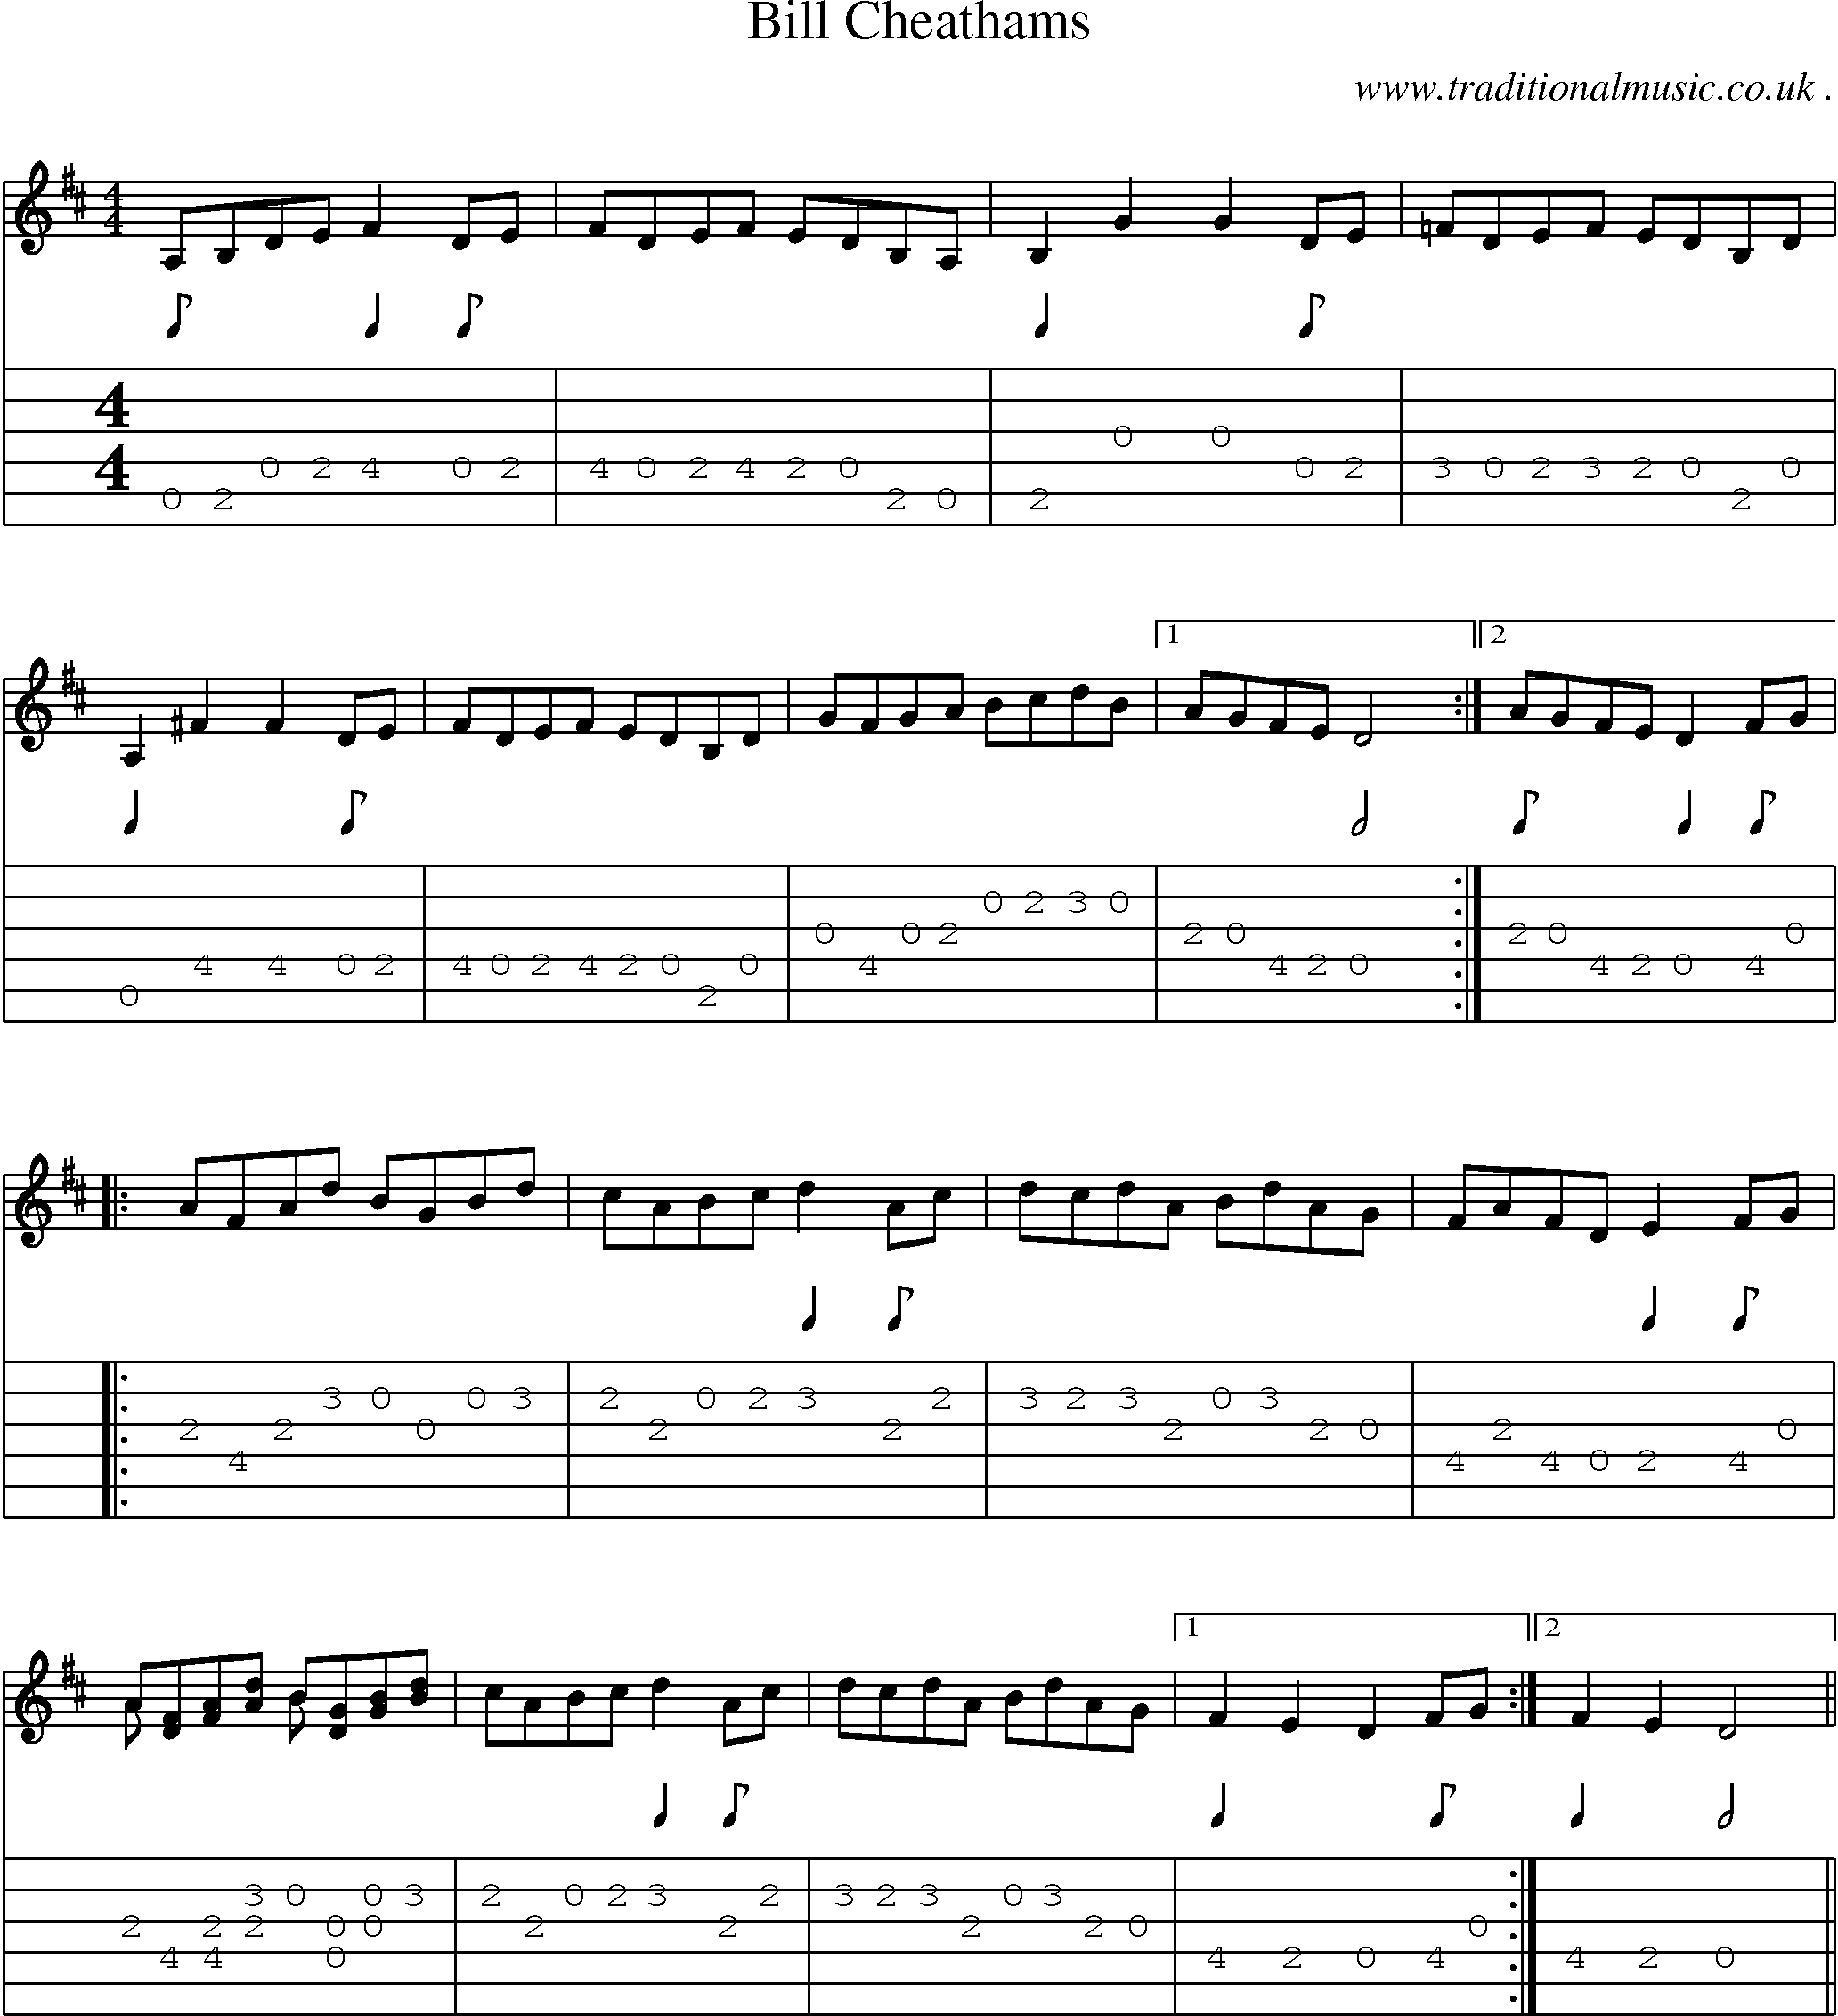 Music Score and Guitar Tabs for Bill Cheathams